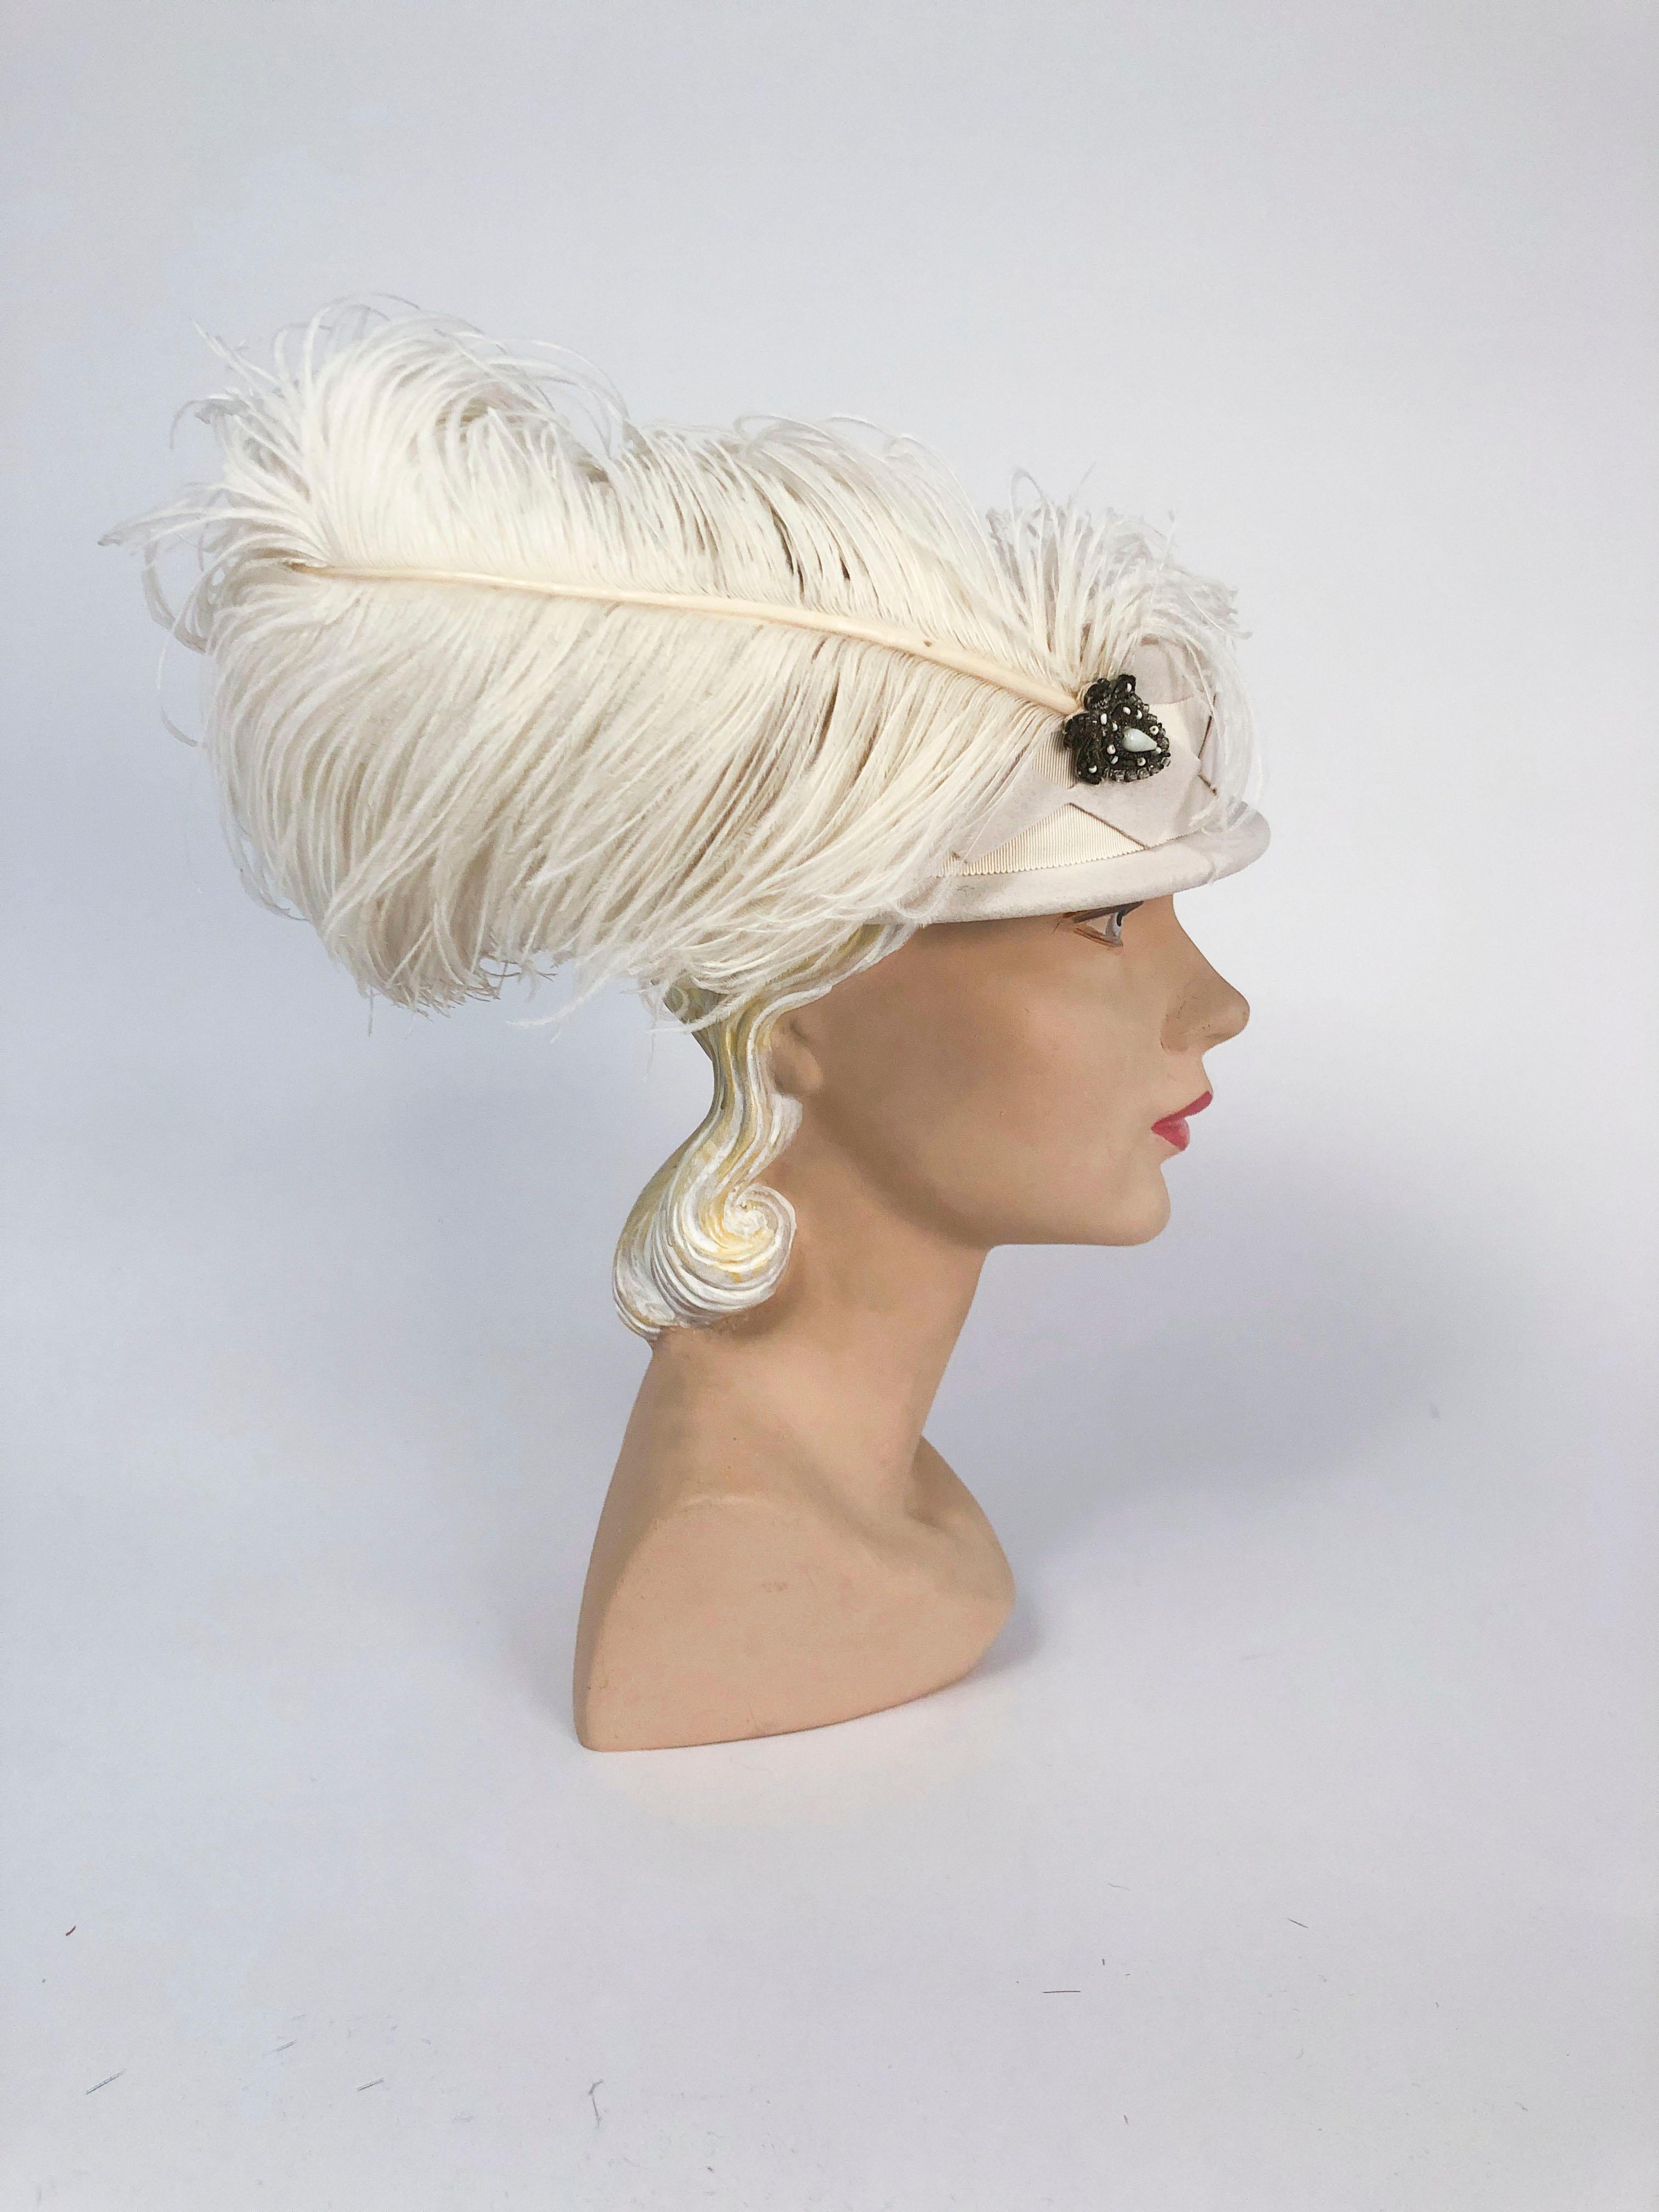 Gray 1940s Cream Fur Felt Hat with Wide Hat Band, Diamond Applique and Curled Feather